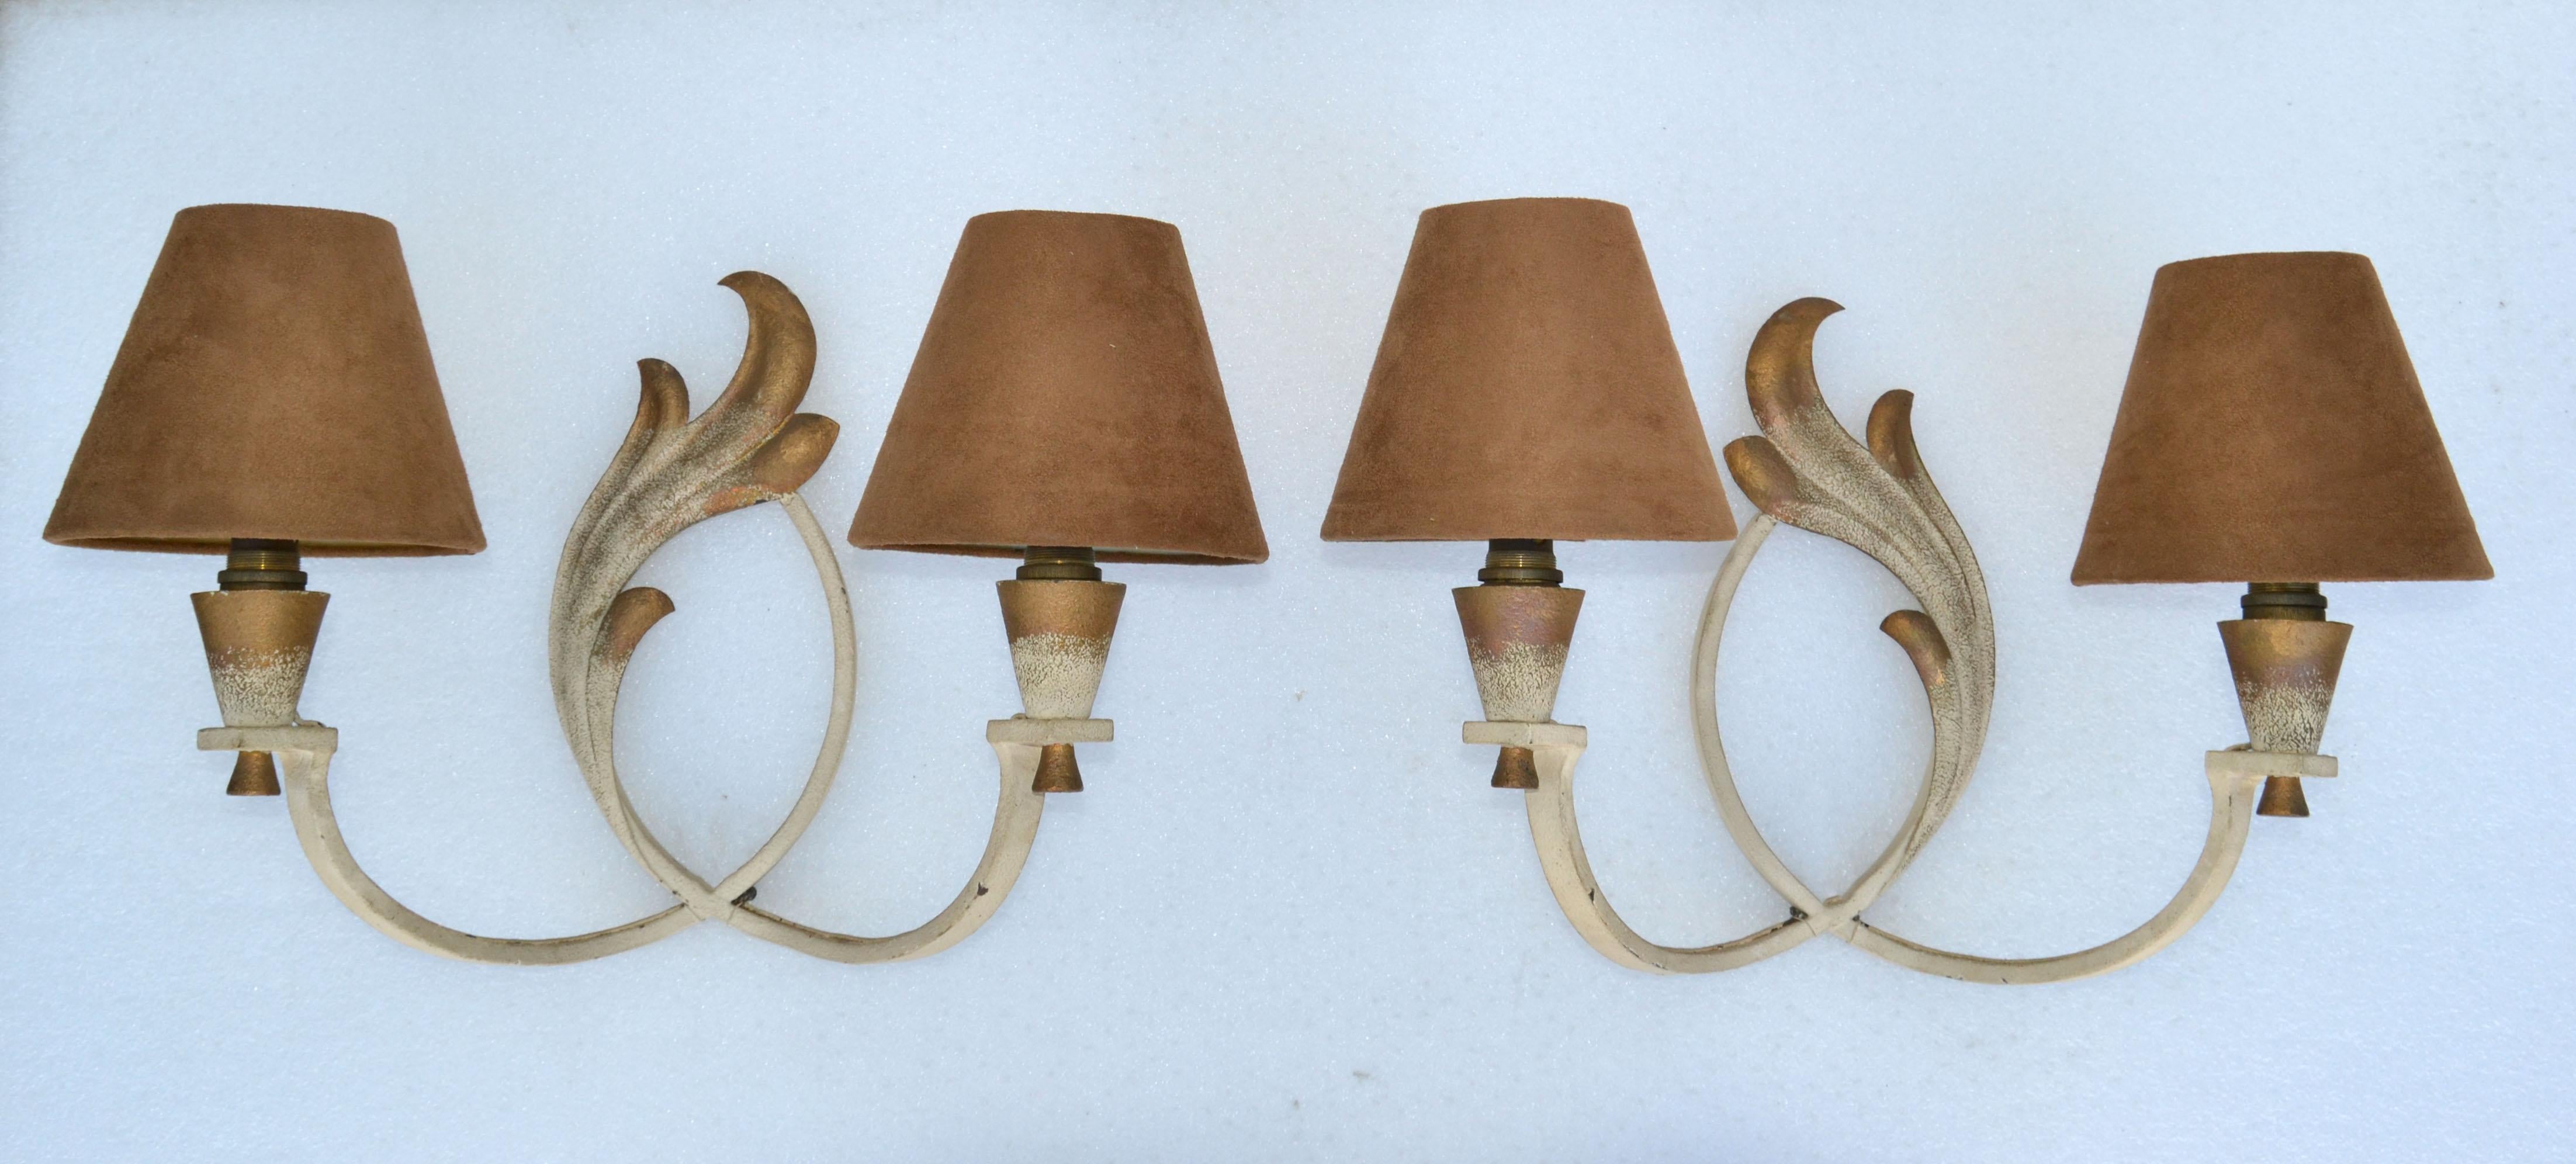 Superb pair of Italian Art Deco wrought iron sconces, wall lights with beige and Gold Finish, designed by Riccardo Scarpa in the late 1950s.
They come with custom-made brown Ultrasuede shades.
US rewired and in working condition each Sconce takes